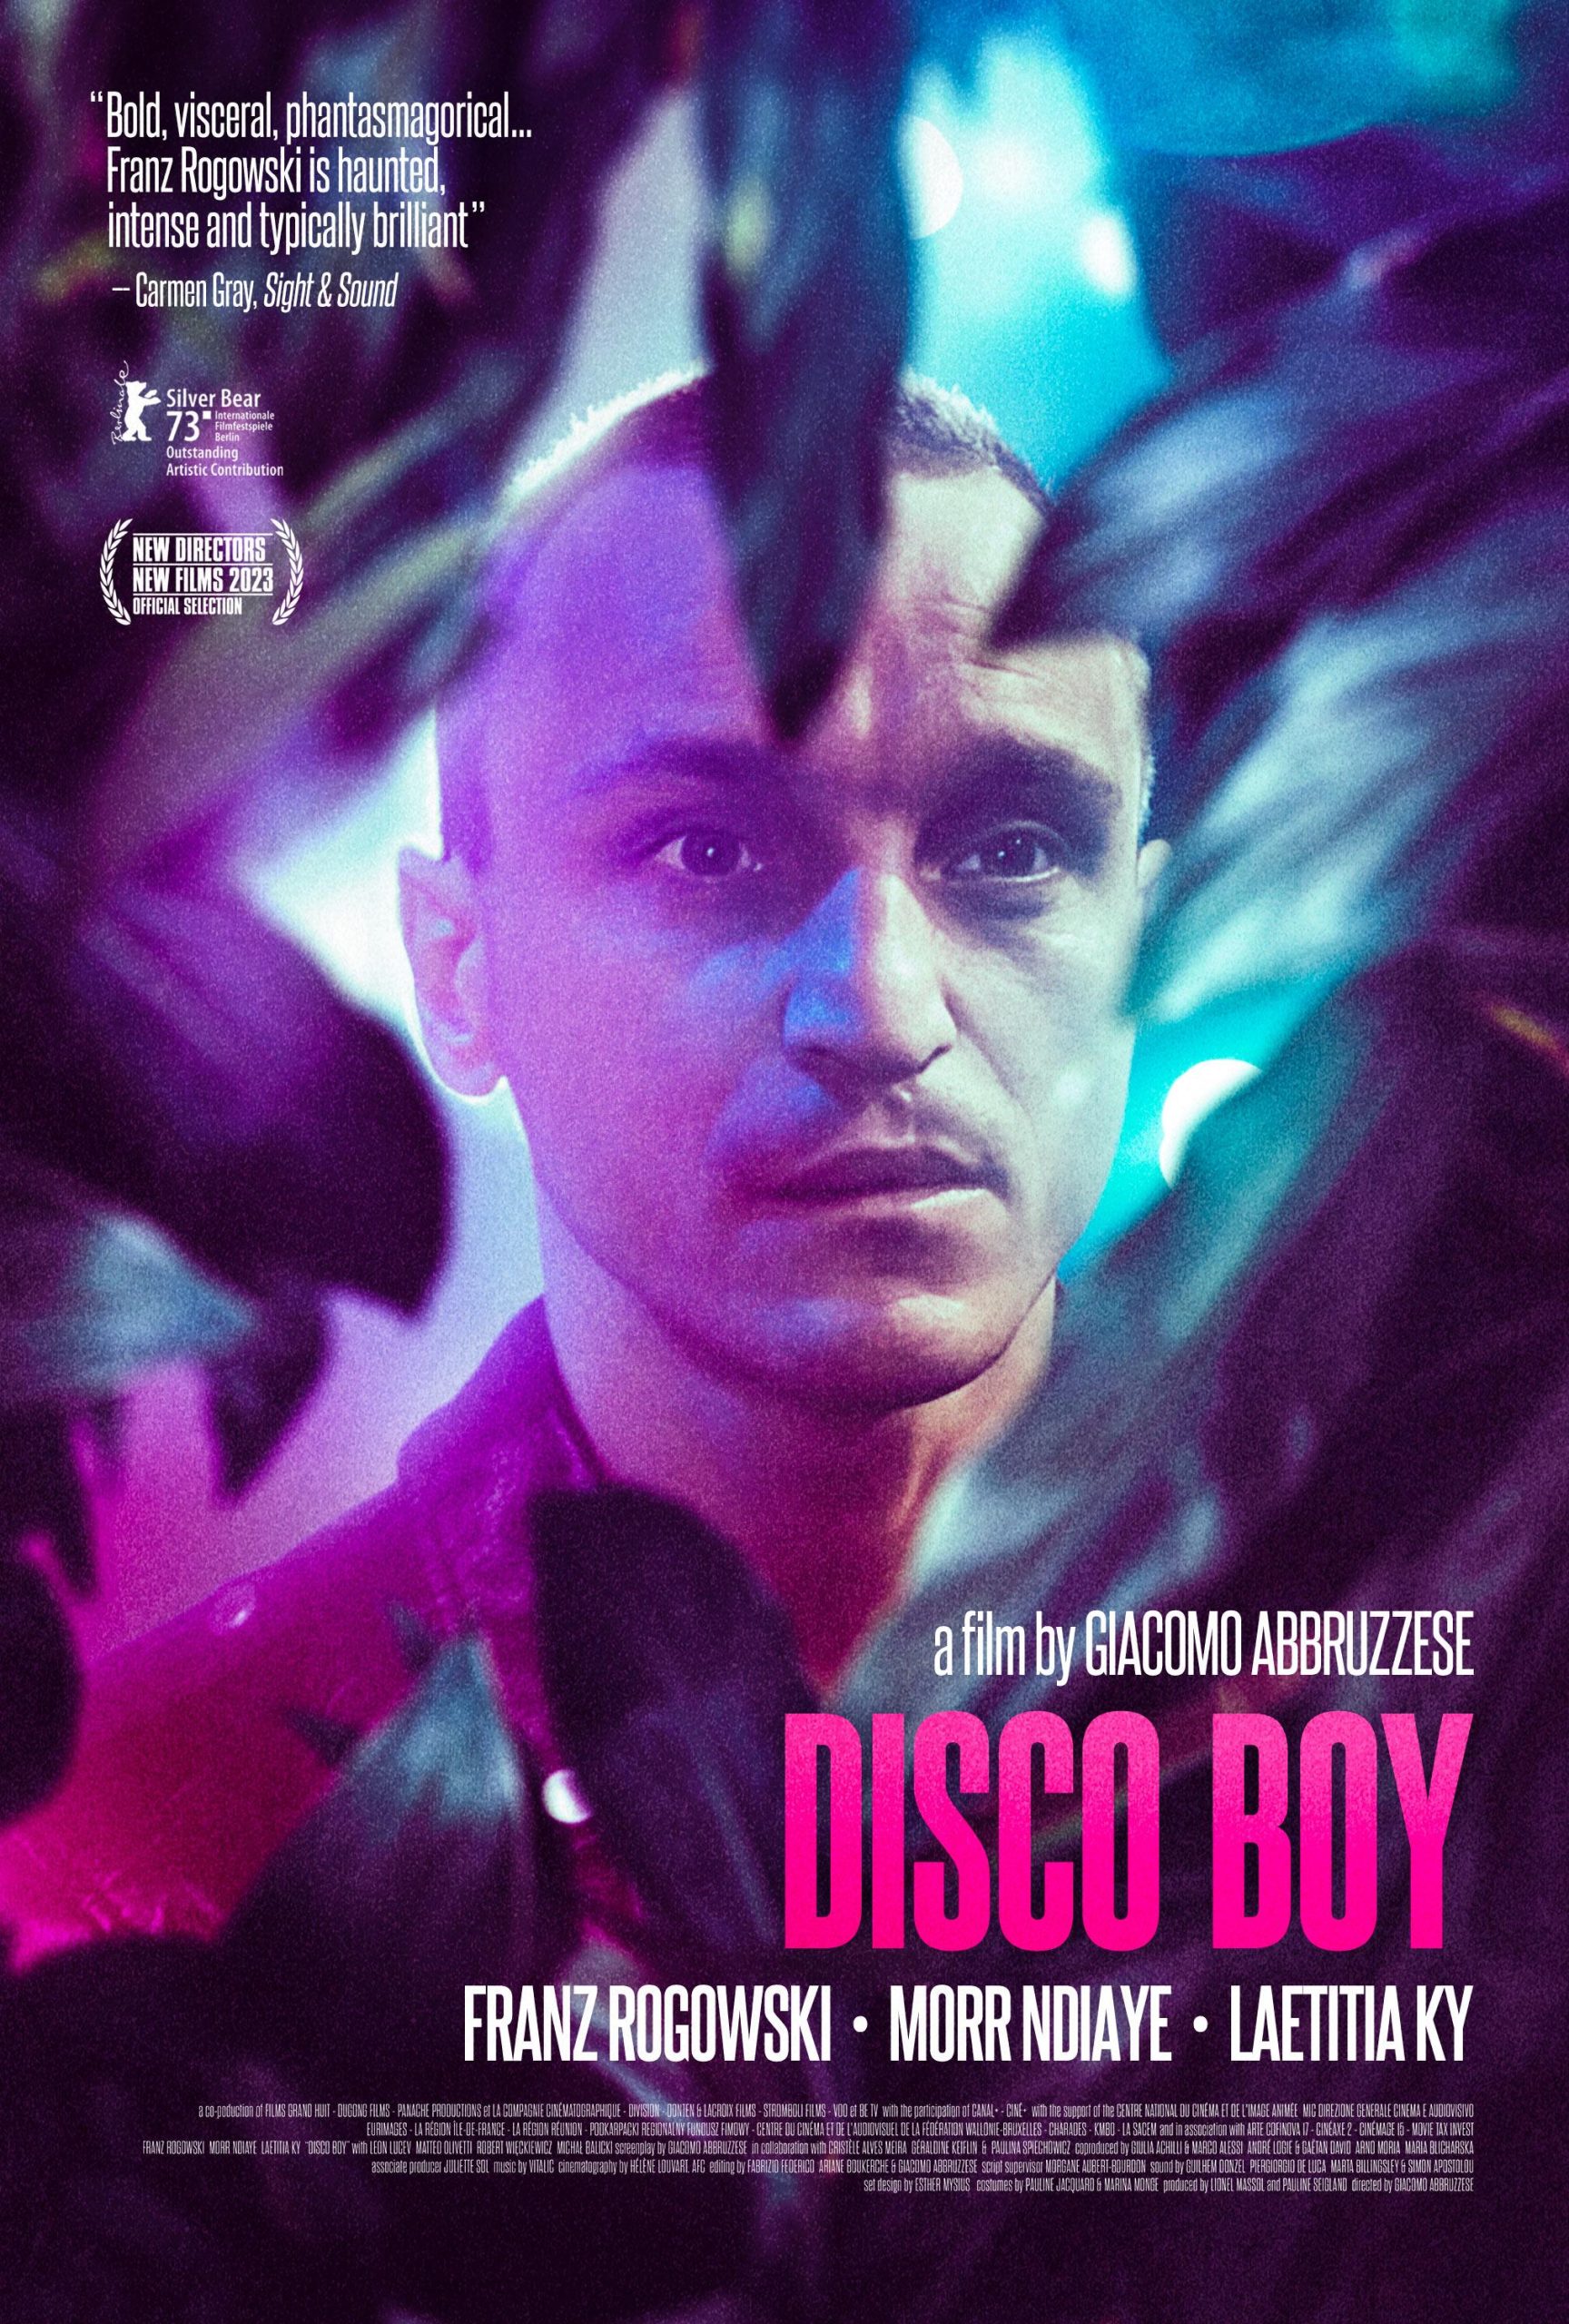 Featured image of Disco Boy